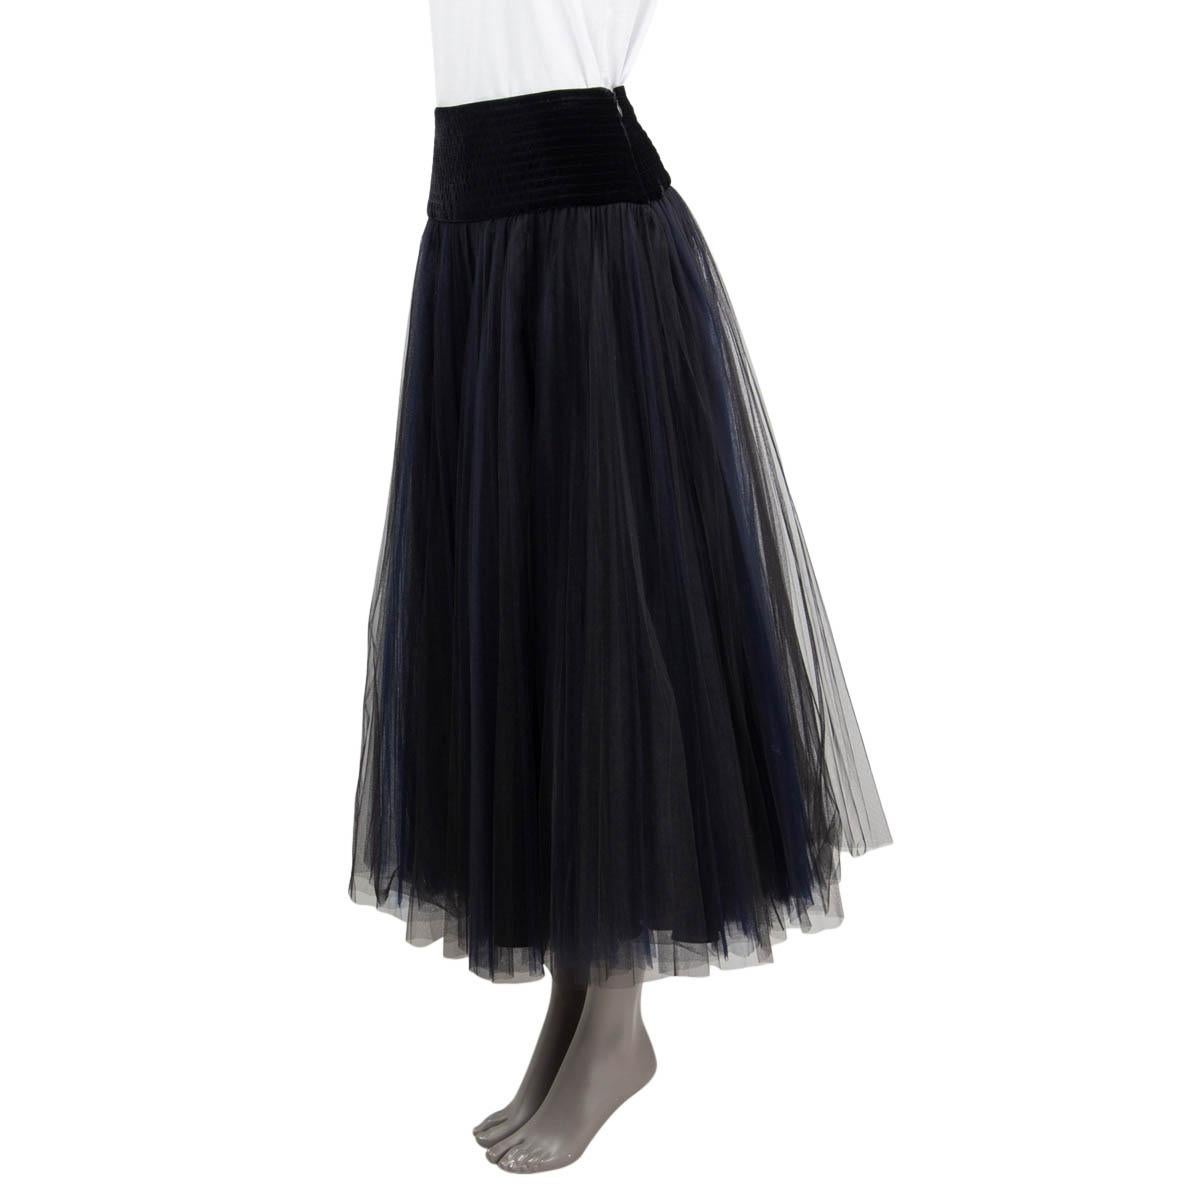 100% authentic Christian Dior Fall/Winter tulle midi skirt in black and navy polyamide (100%). Features a velvet waist in black viscose (80%) and silk (20%). Opens with a concealed zipper and a hook on the side. Lined in black silk (100%). Has been